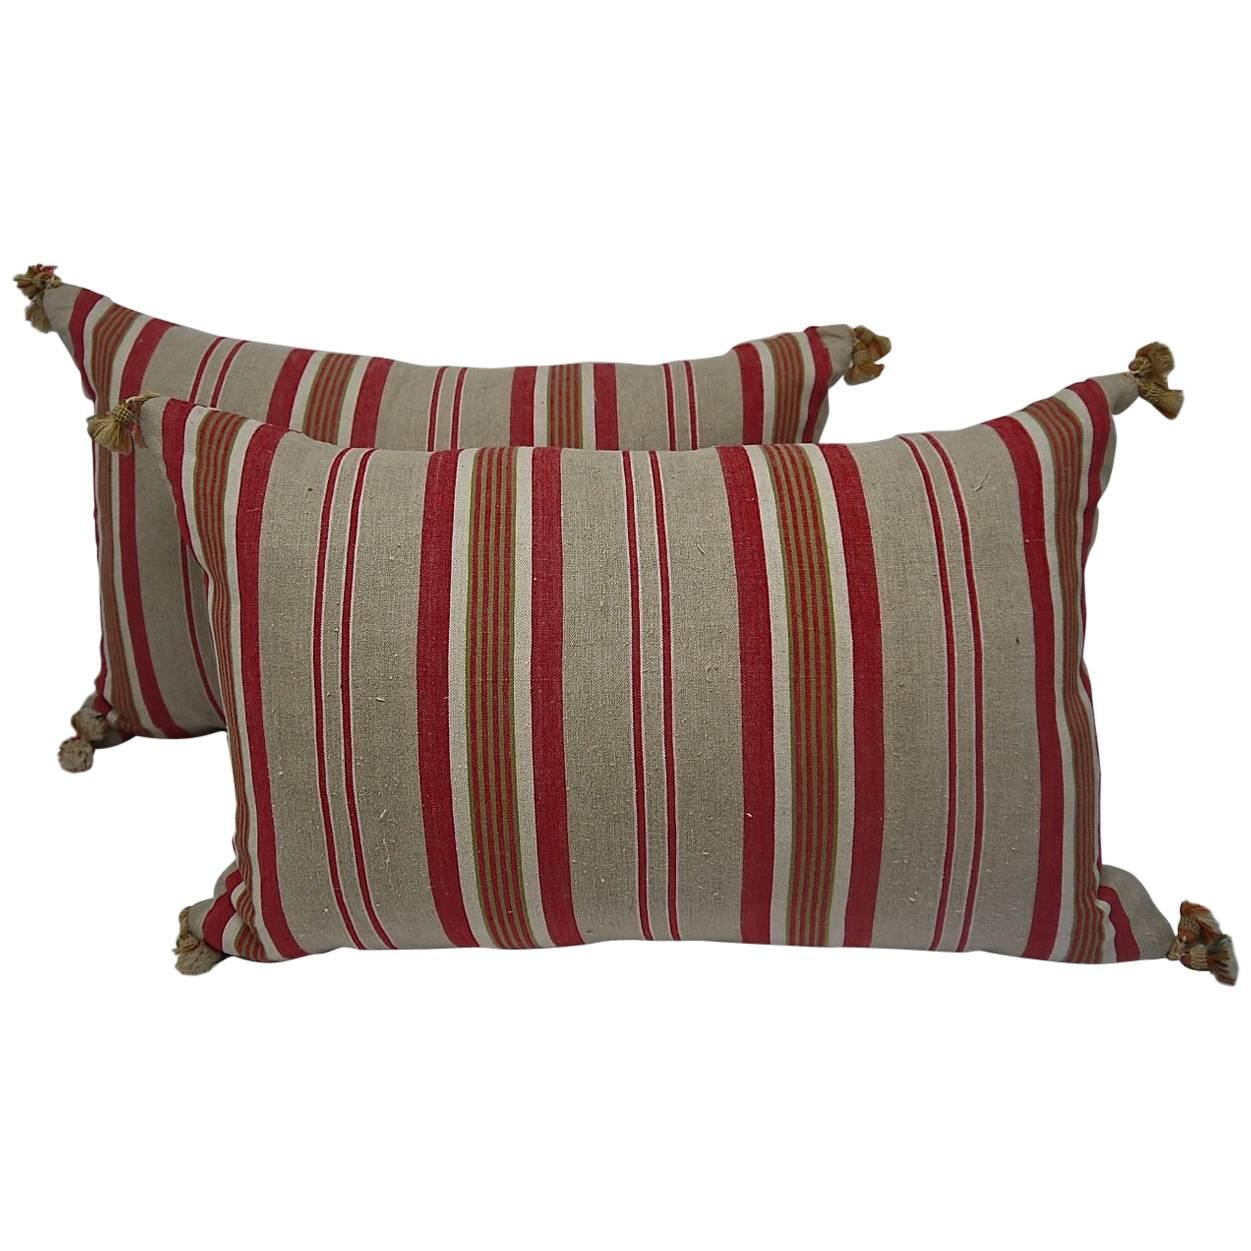 Pair of Early 20th Century French Striped Ticking Linen Pillows